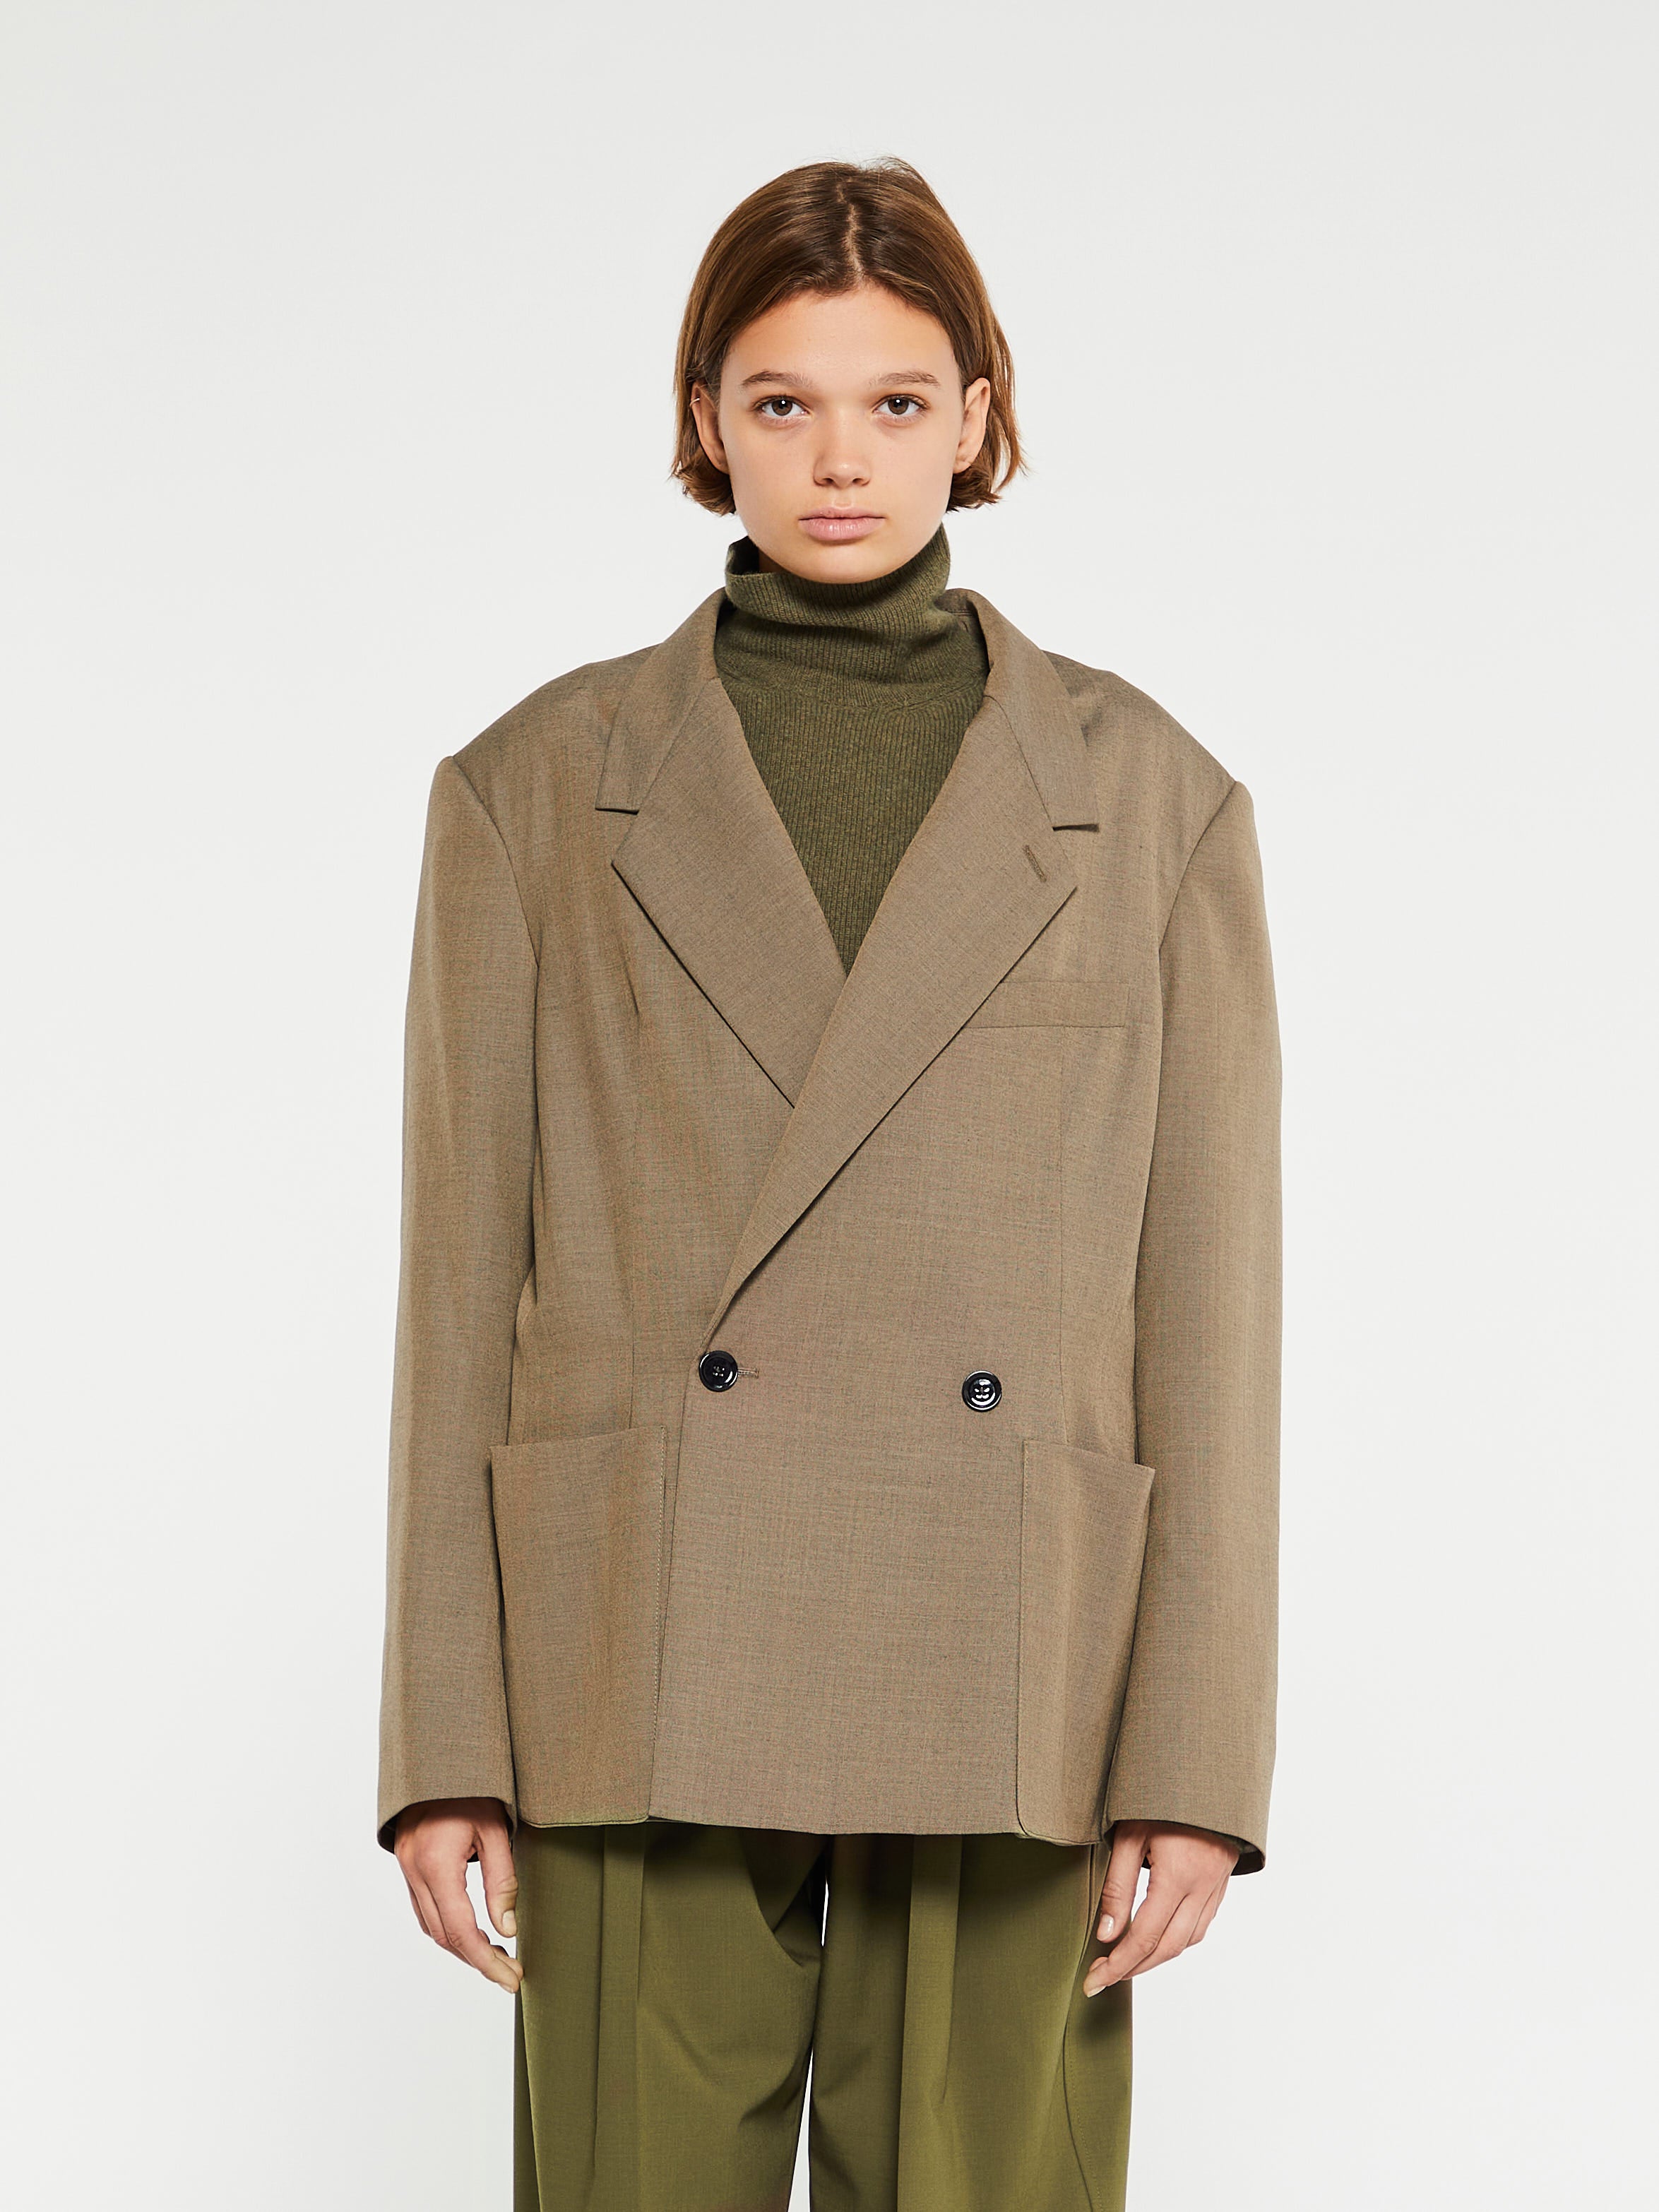 Lemaire - Soft Tailored Jacket in Beige Grey